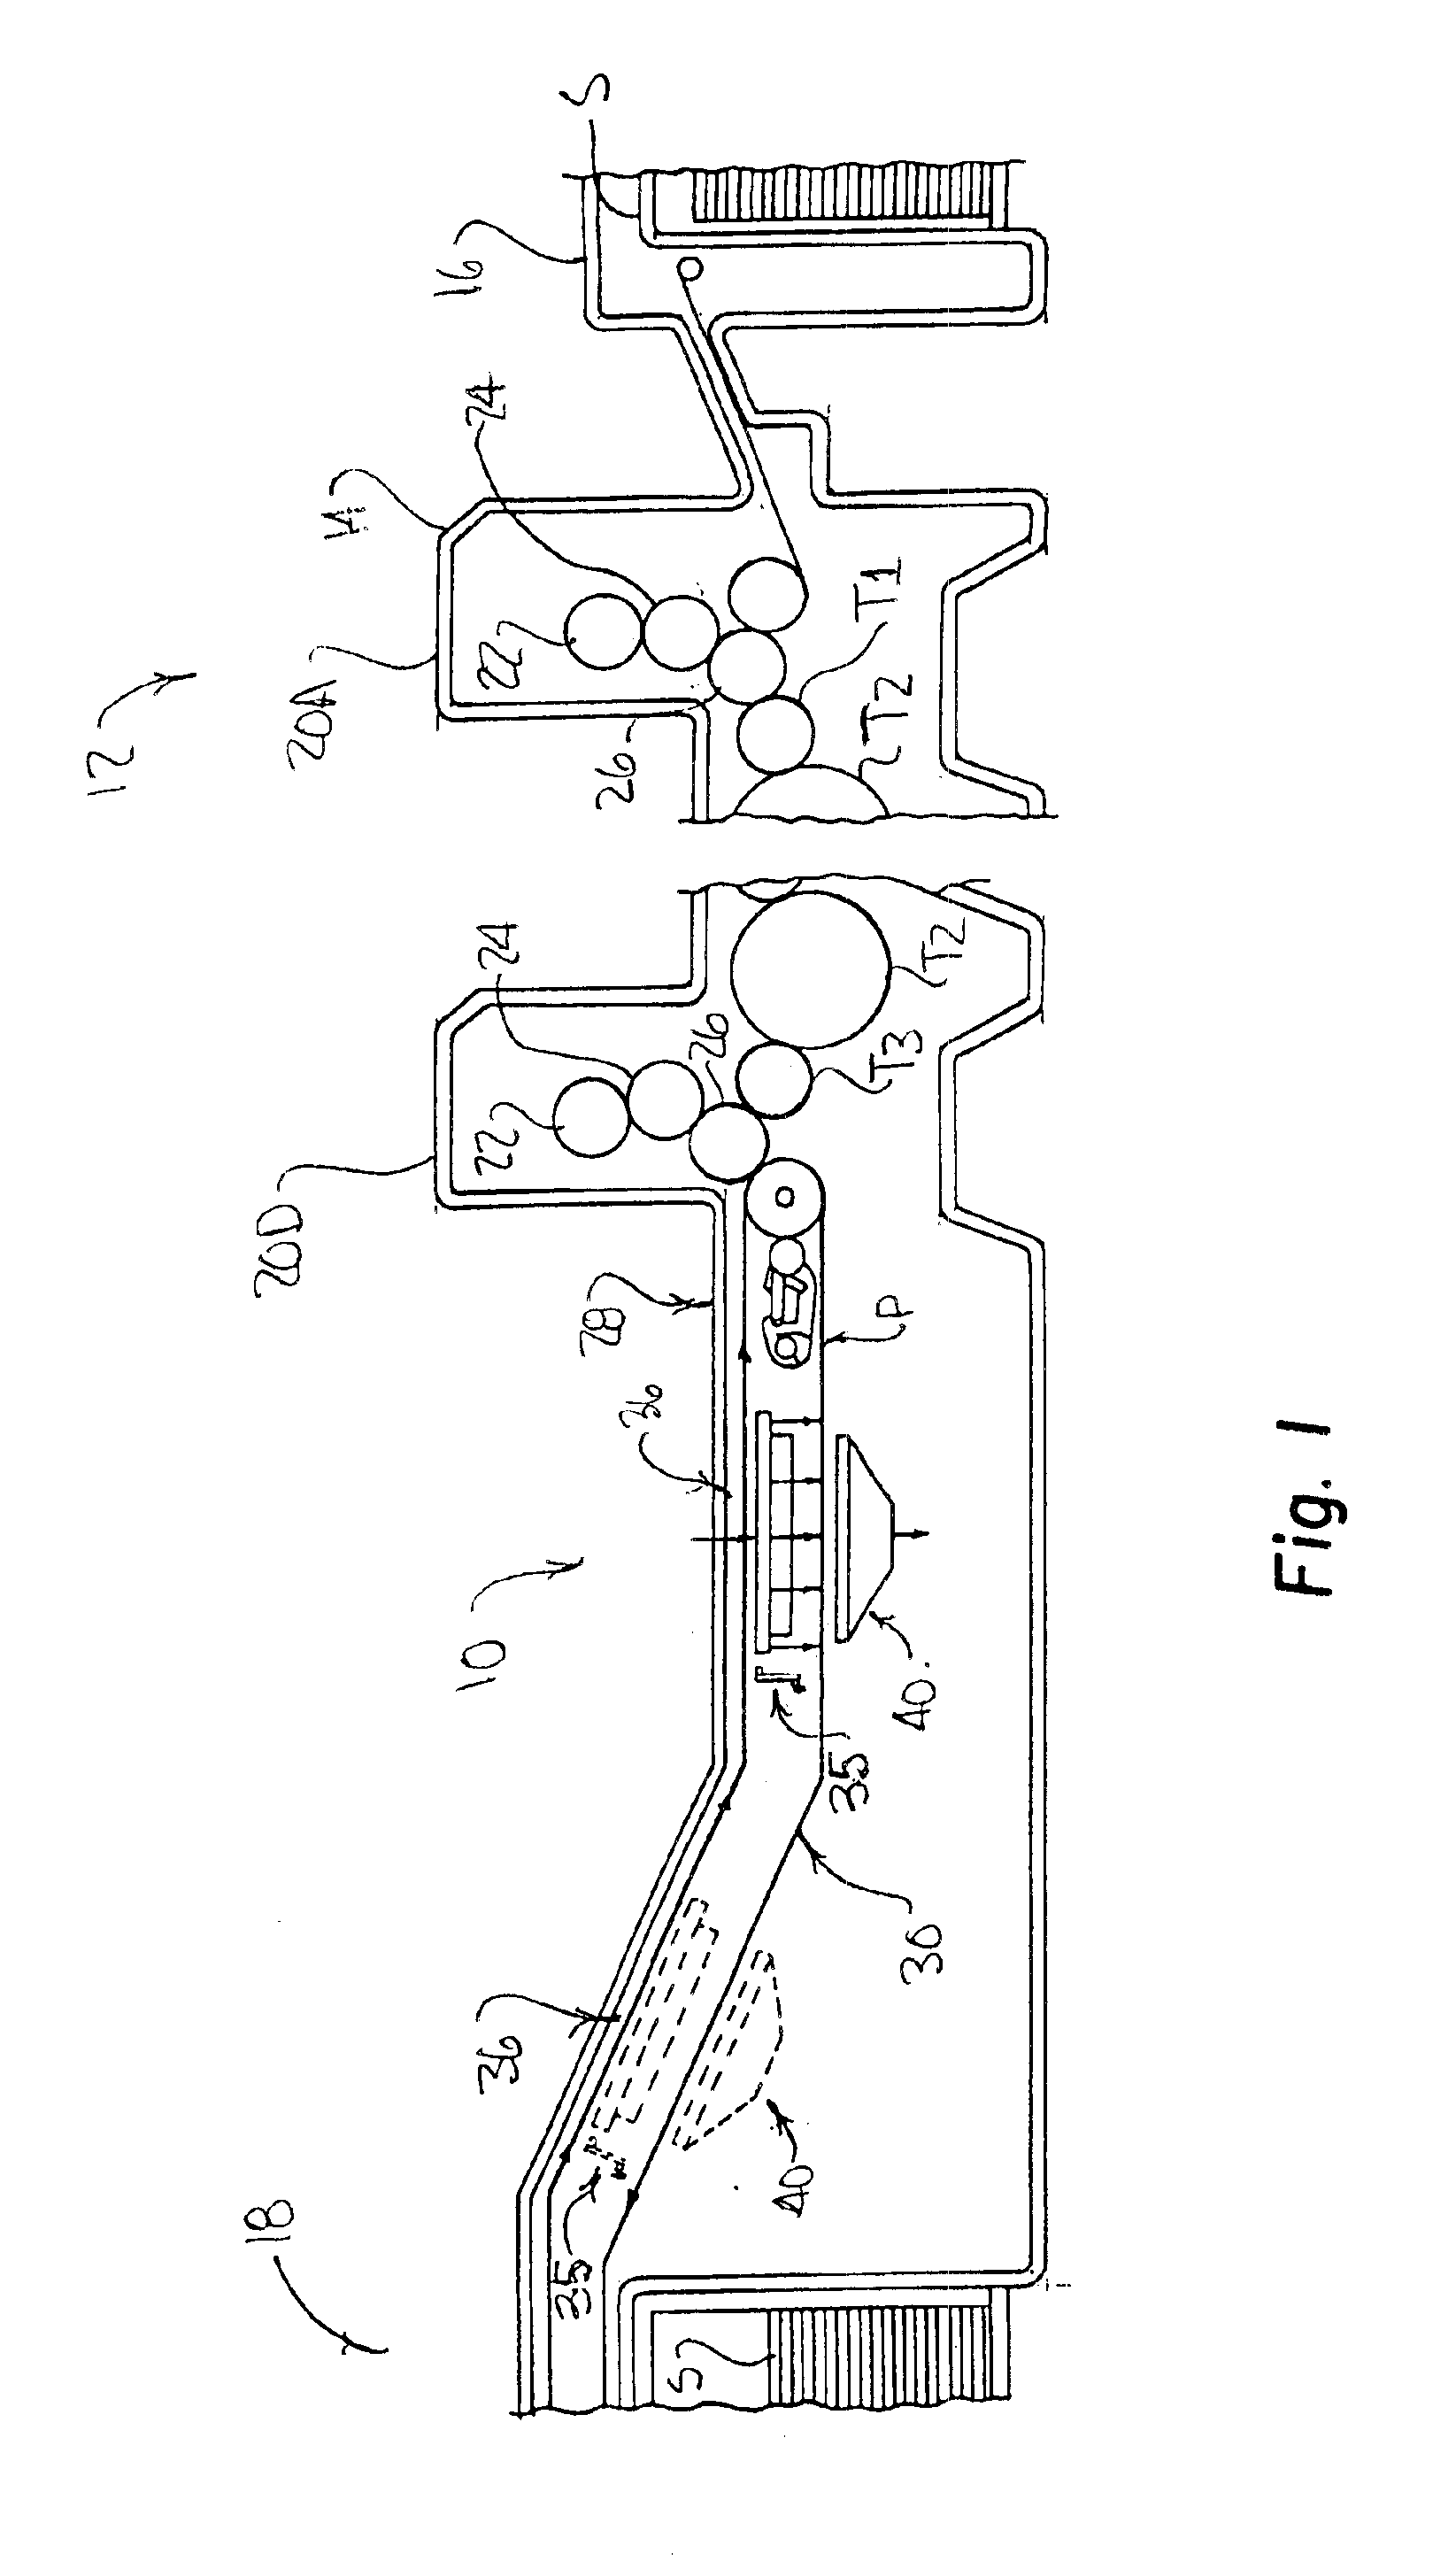 Power saving automatic zoned dryer apparatus and method